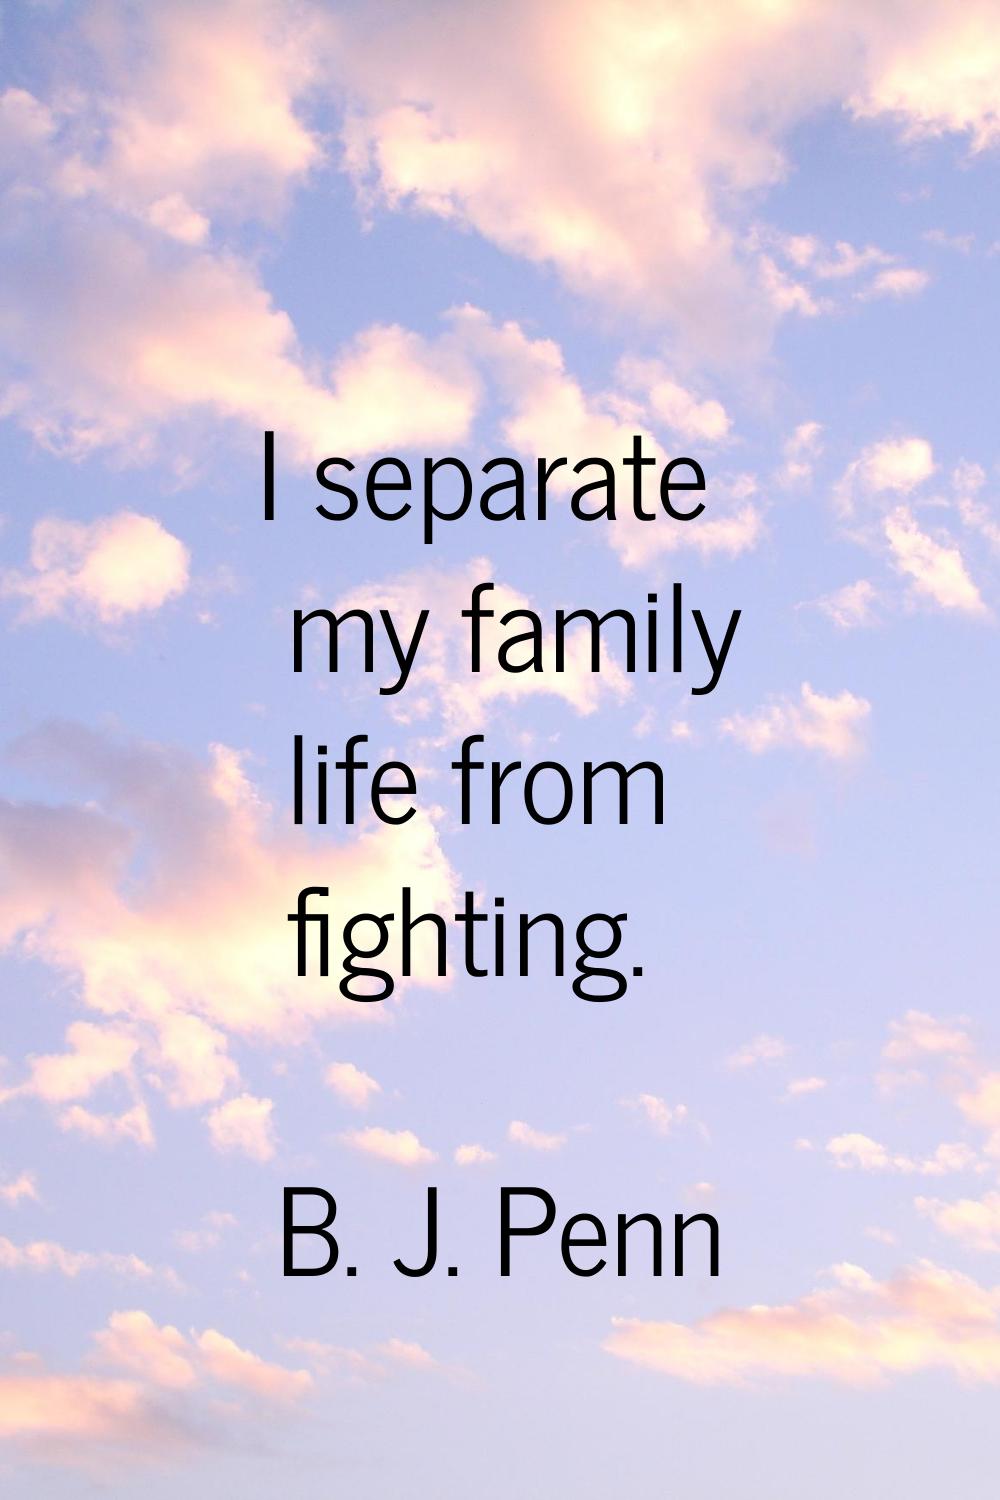 I separate my family life from fighting.